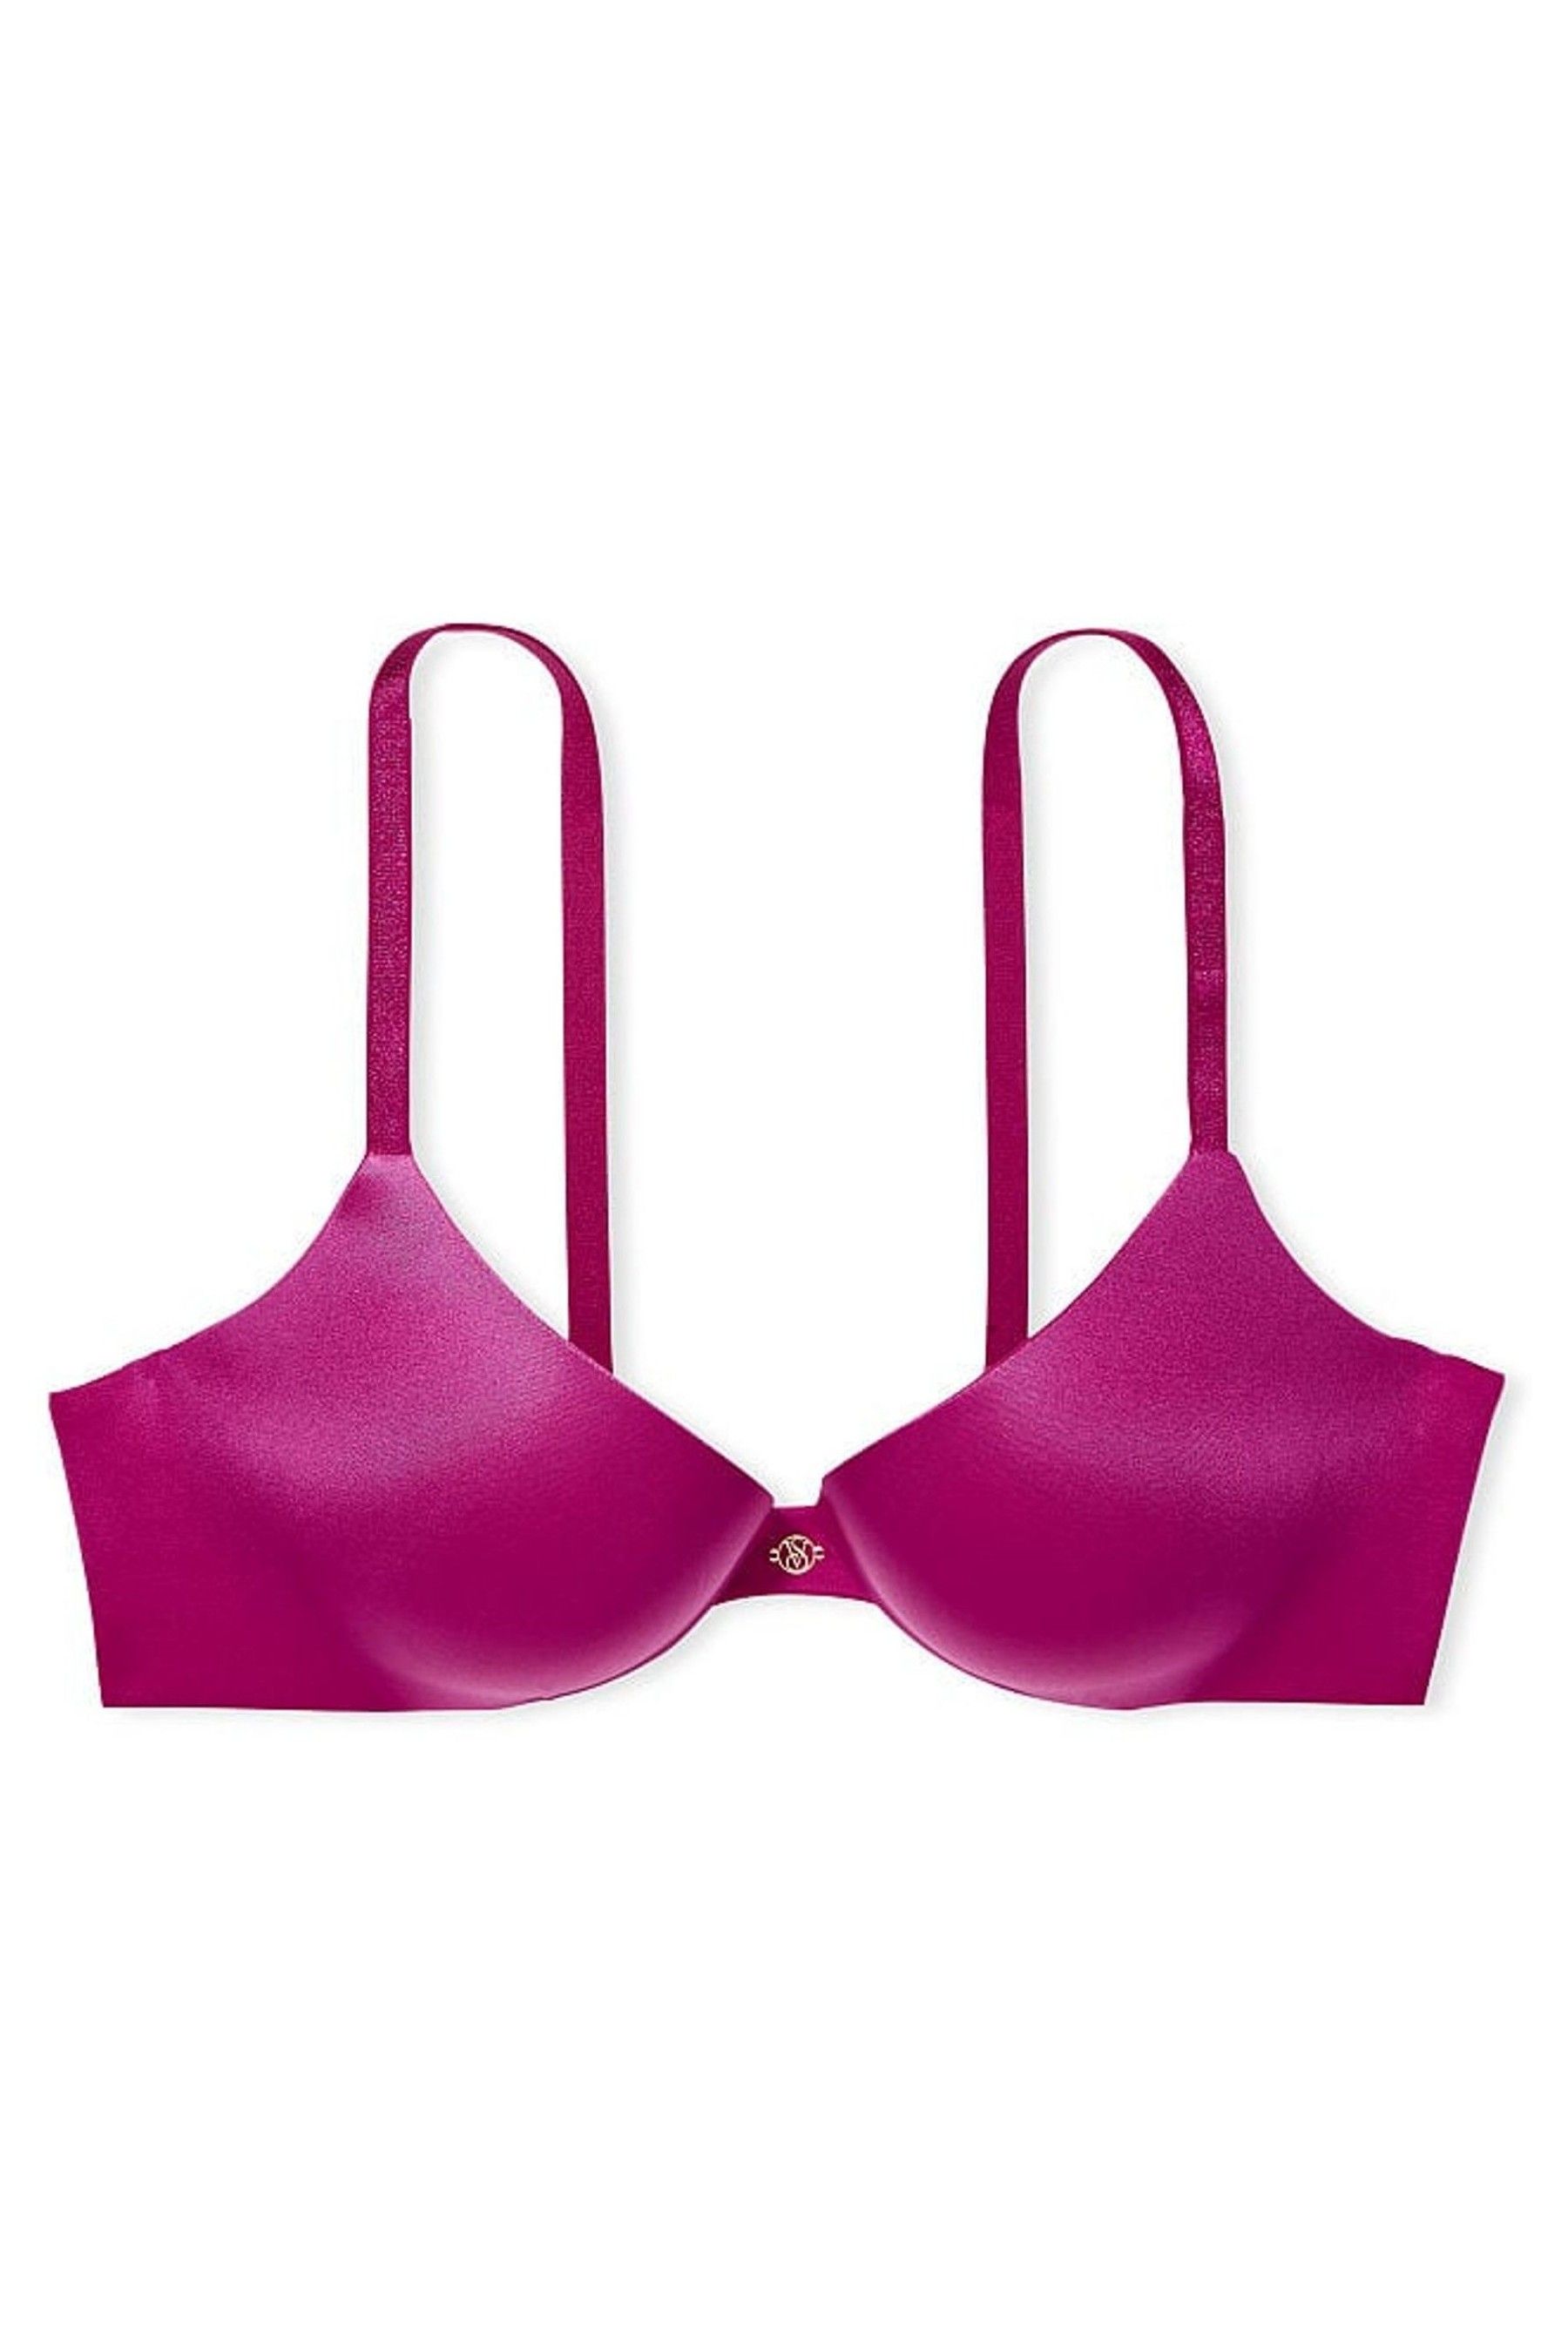 Buy Victoria's Secret Smooth Plunge Push Up Bra from the Victoria's ...